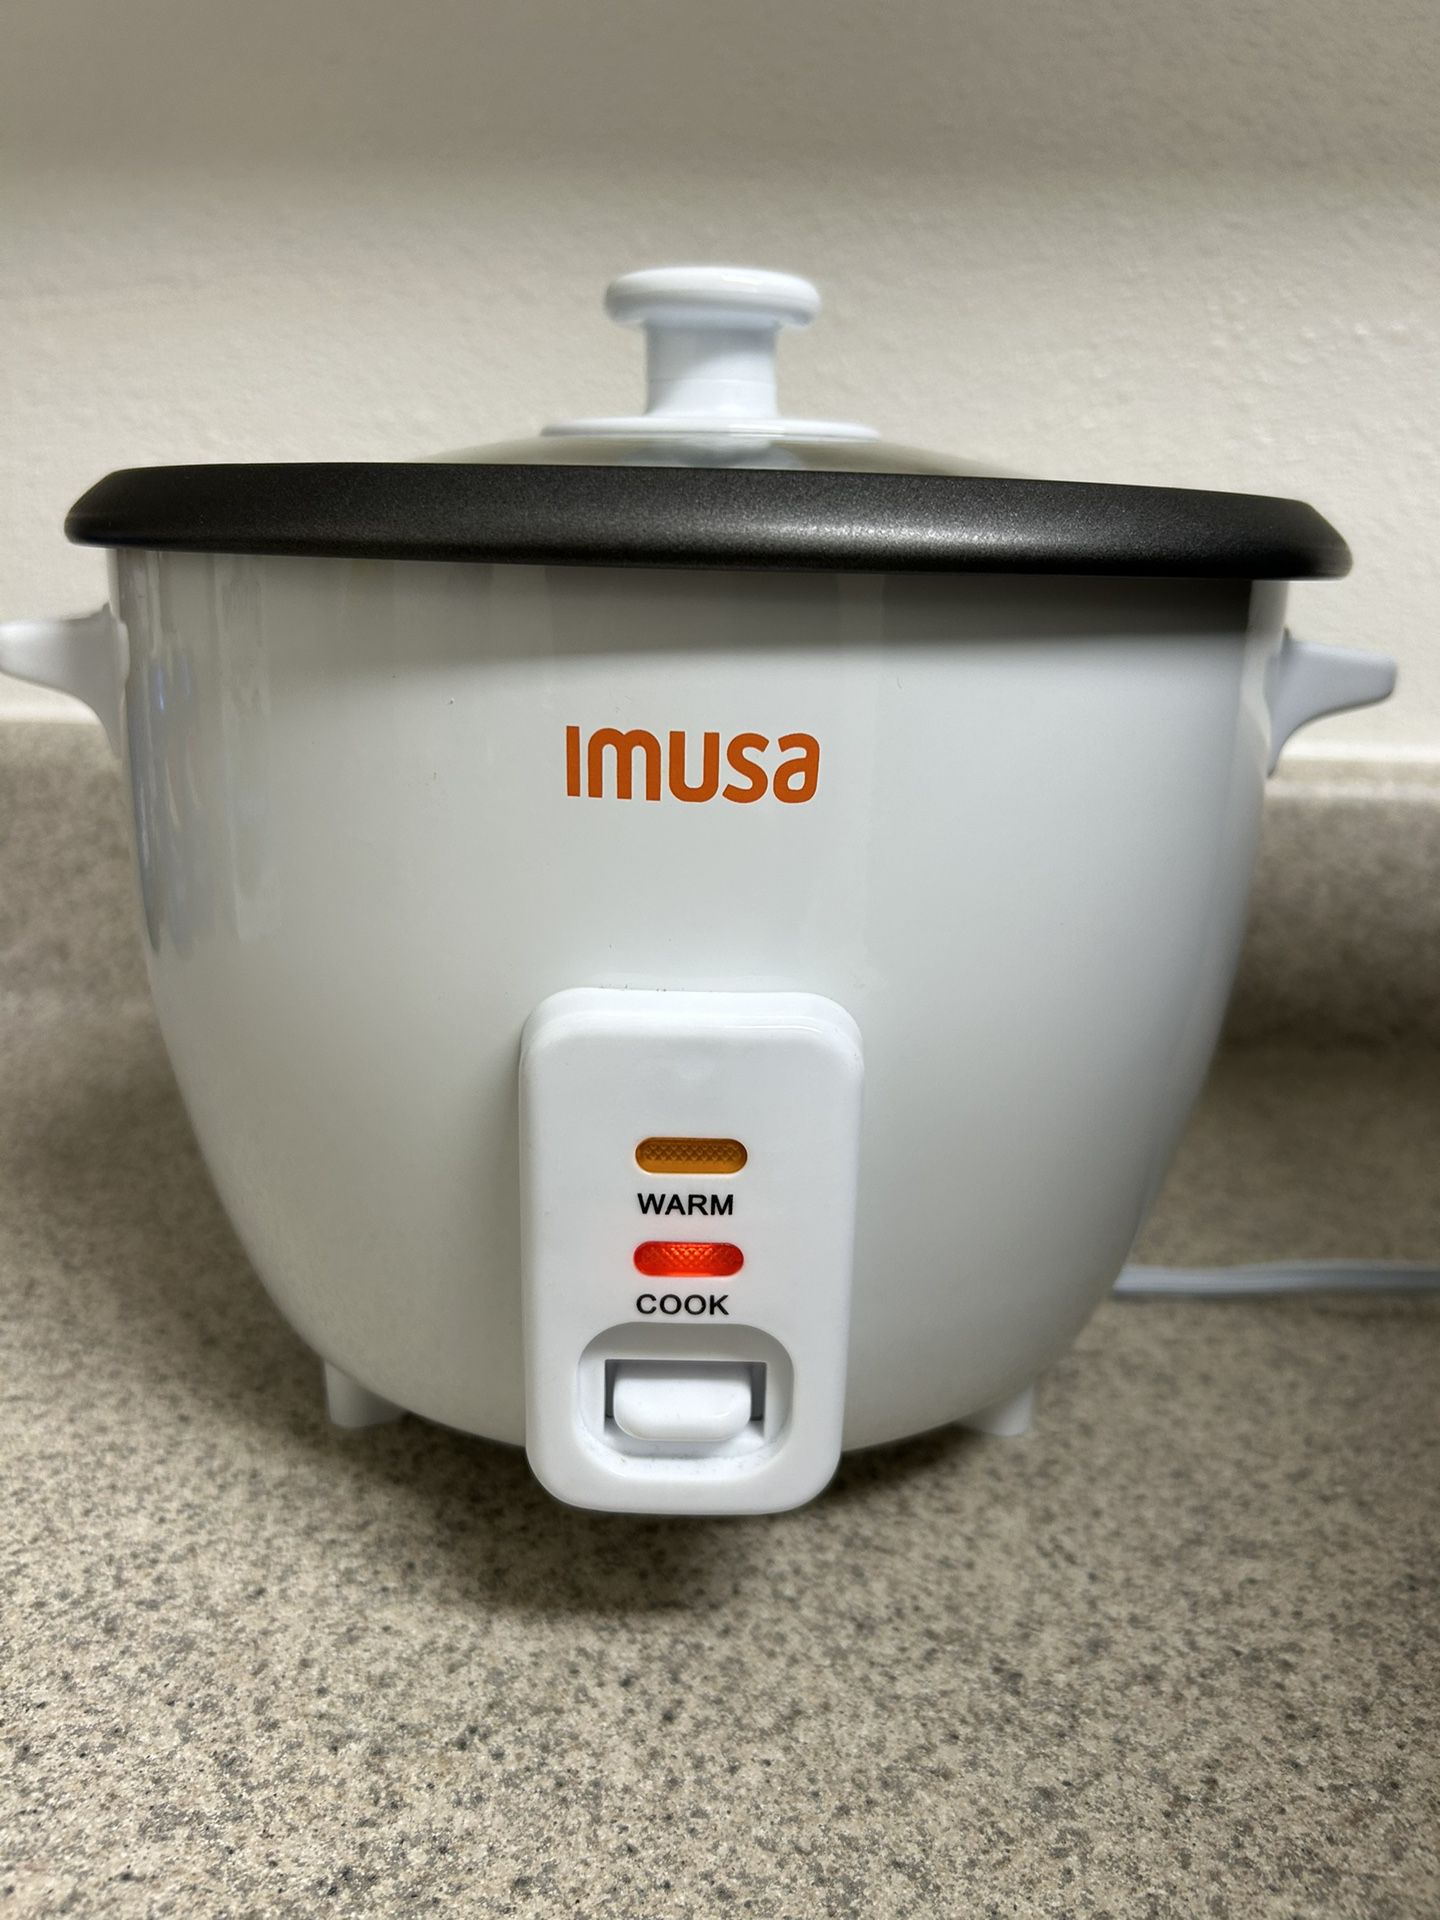 IMUSA 8-Cup Non-Stick White Rice Cooker with Non-Stick Cooking Pot